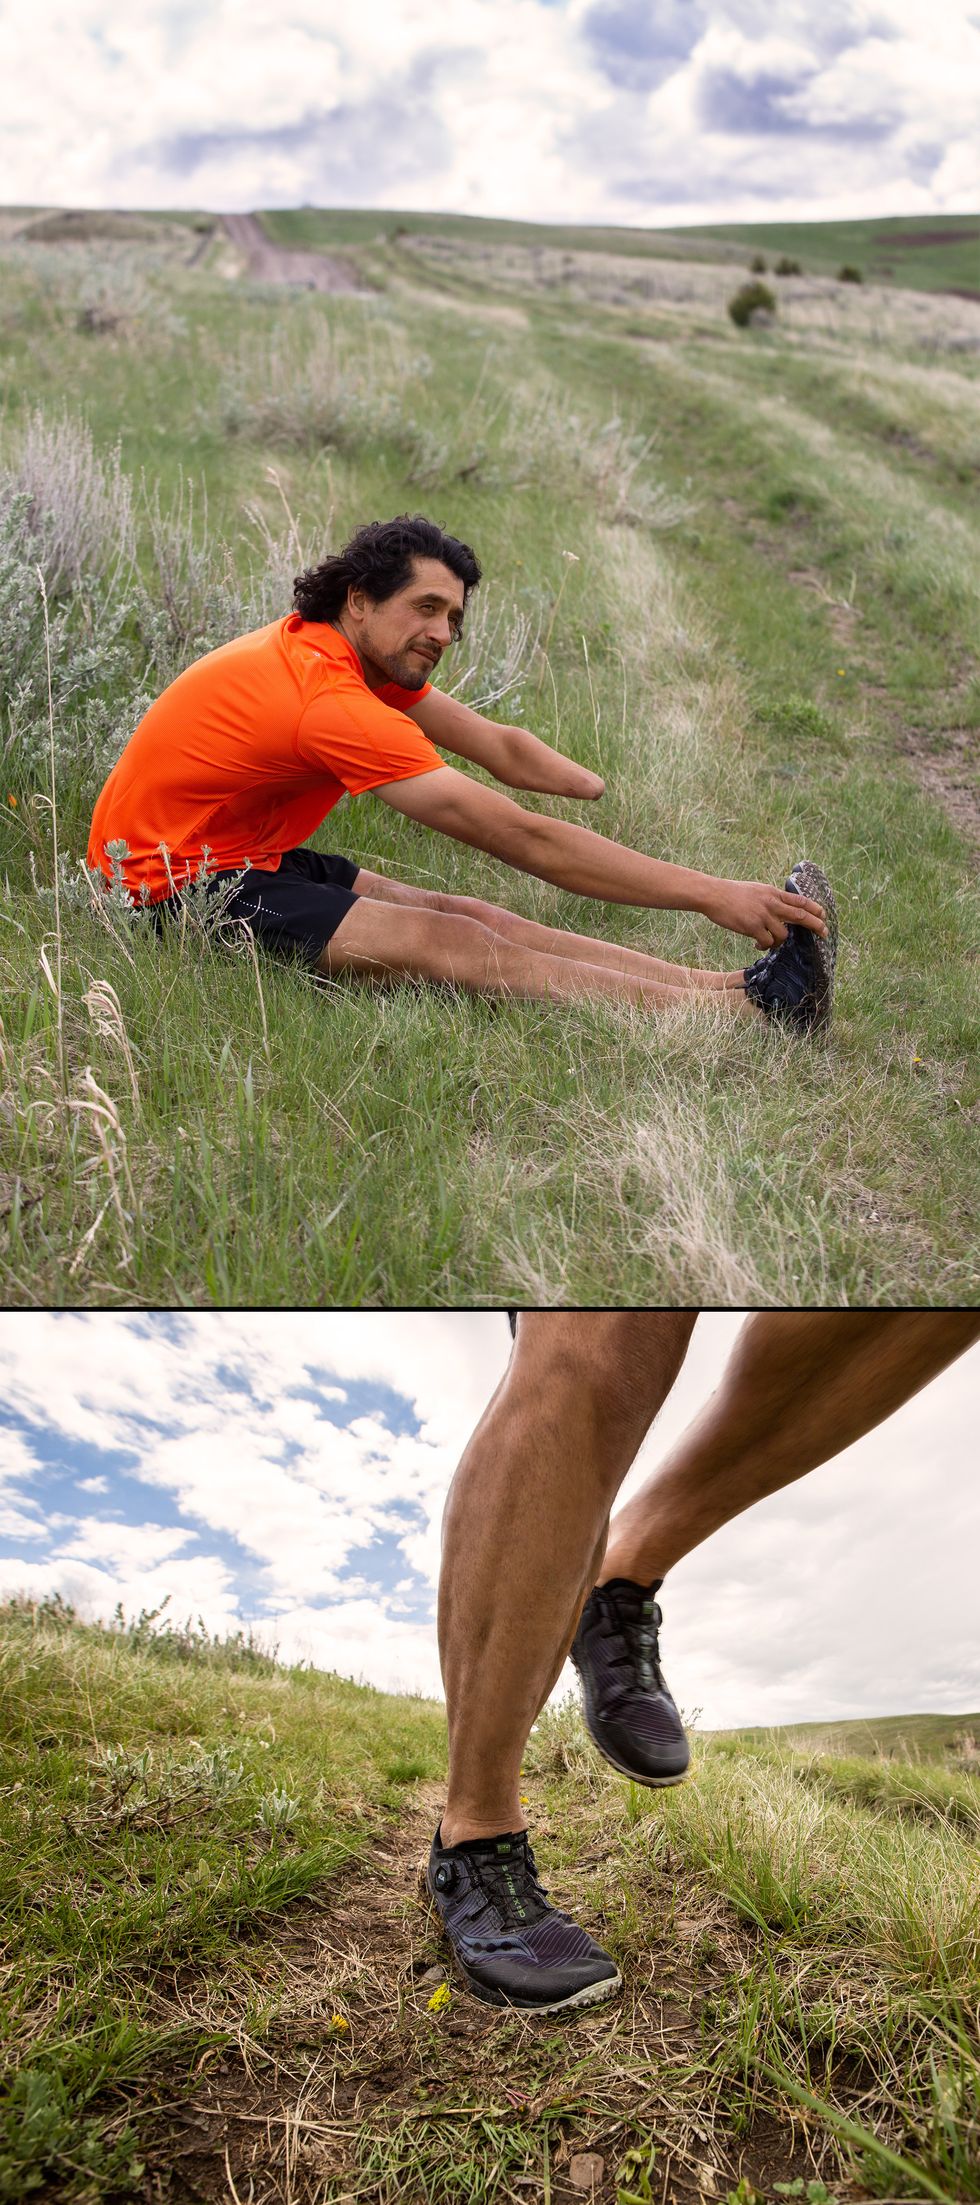 People in nature, Grass, Leg, Joint, Arm, Stretching, Human leg, Knee, Muscle, Grassland, 